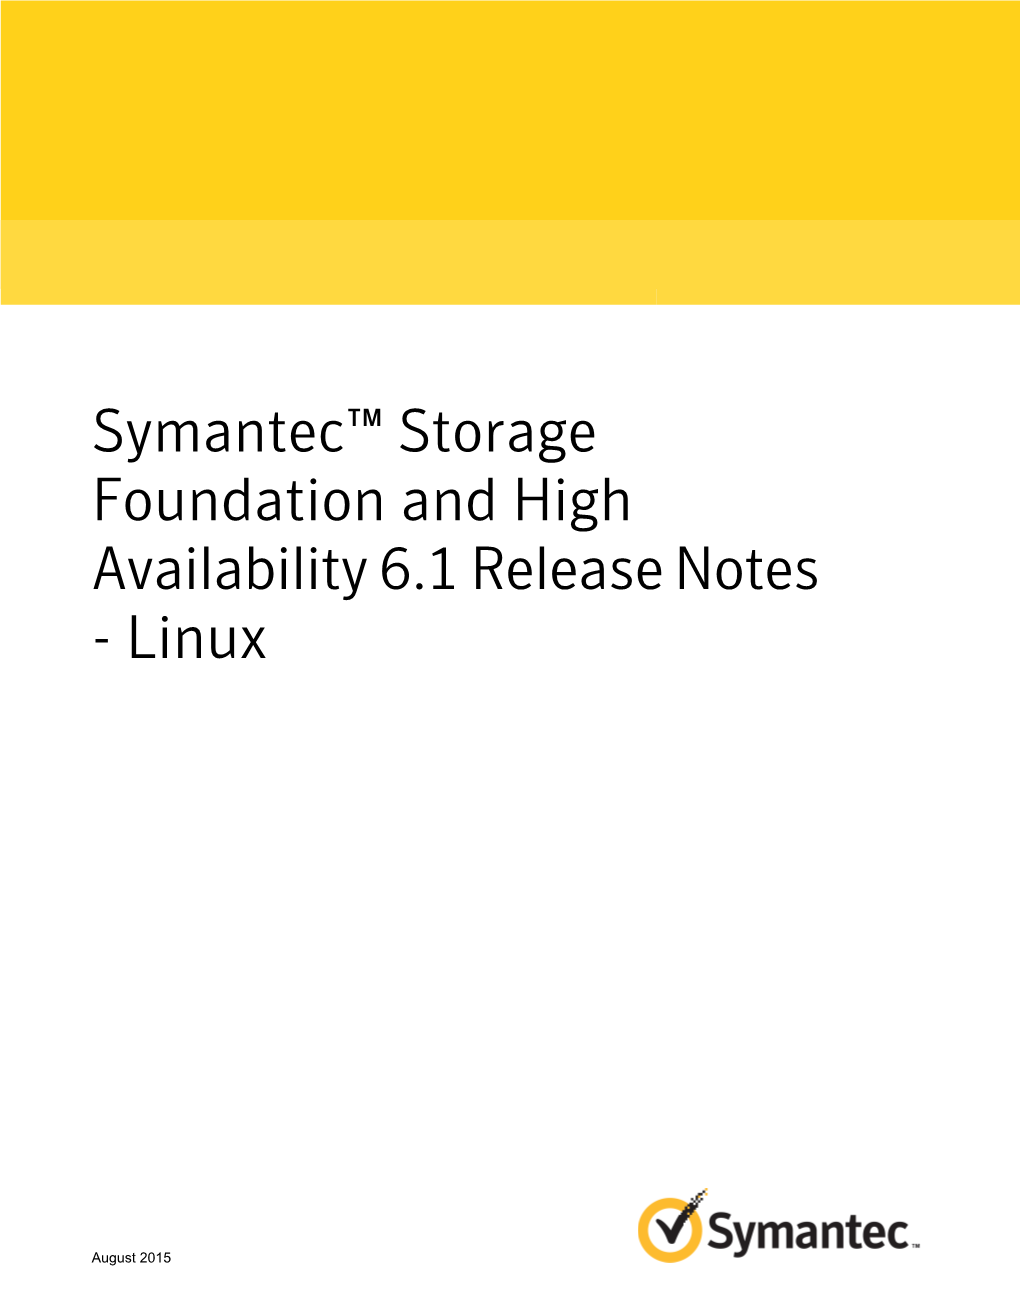 Symantec™ Storage Foundation and High Availability 6.1 Release Notes - Linux